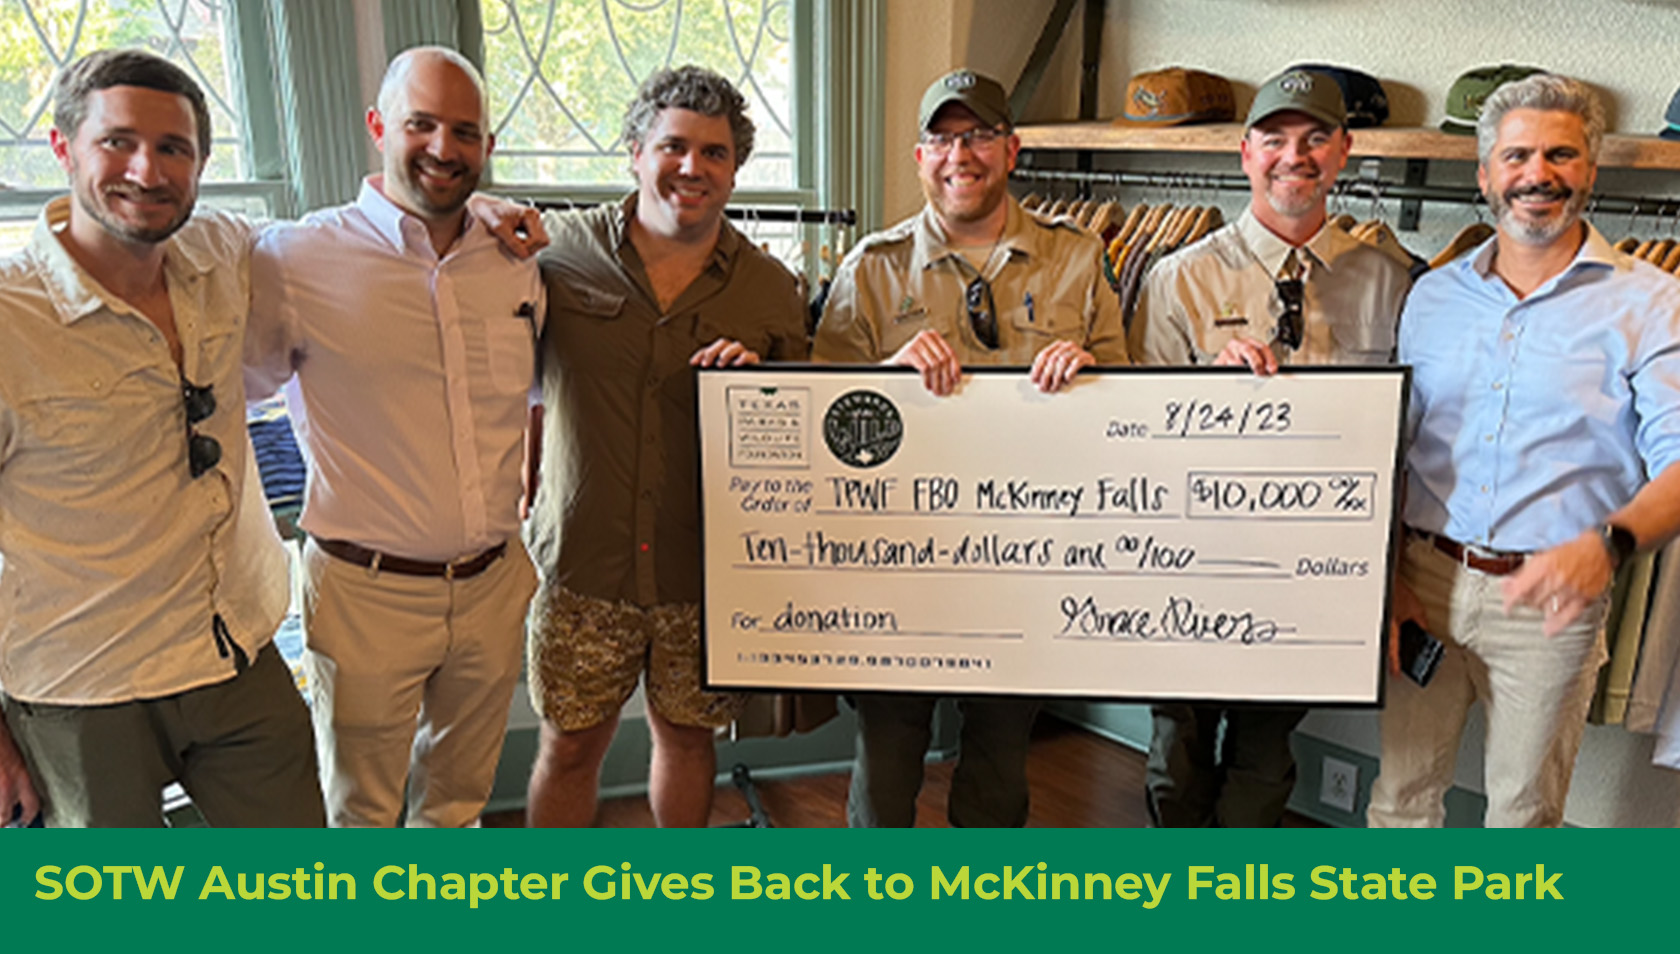 Story #3: SOTW Austin Chapter Gives Back to Mckinney Falls State Park